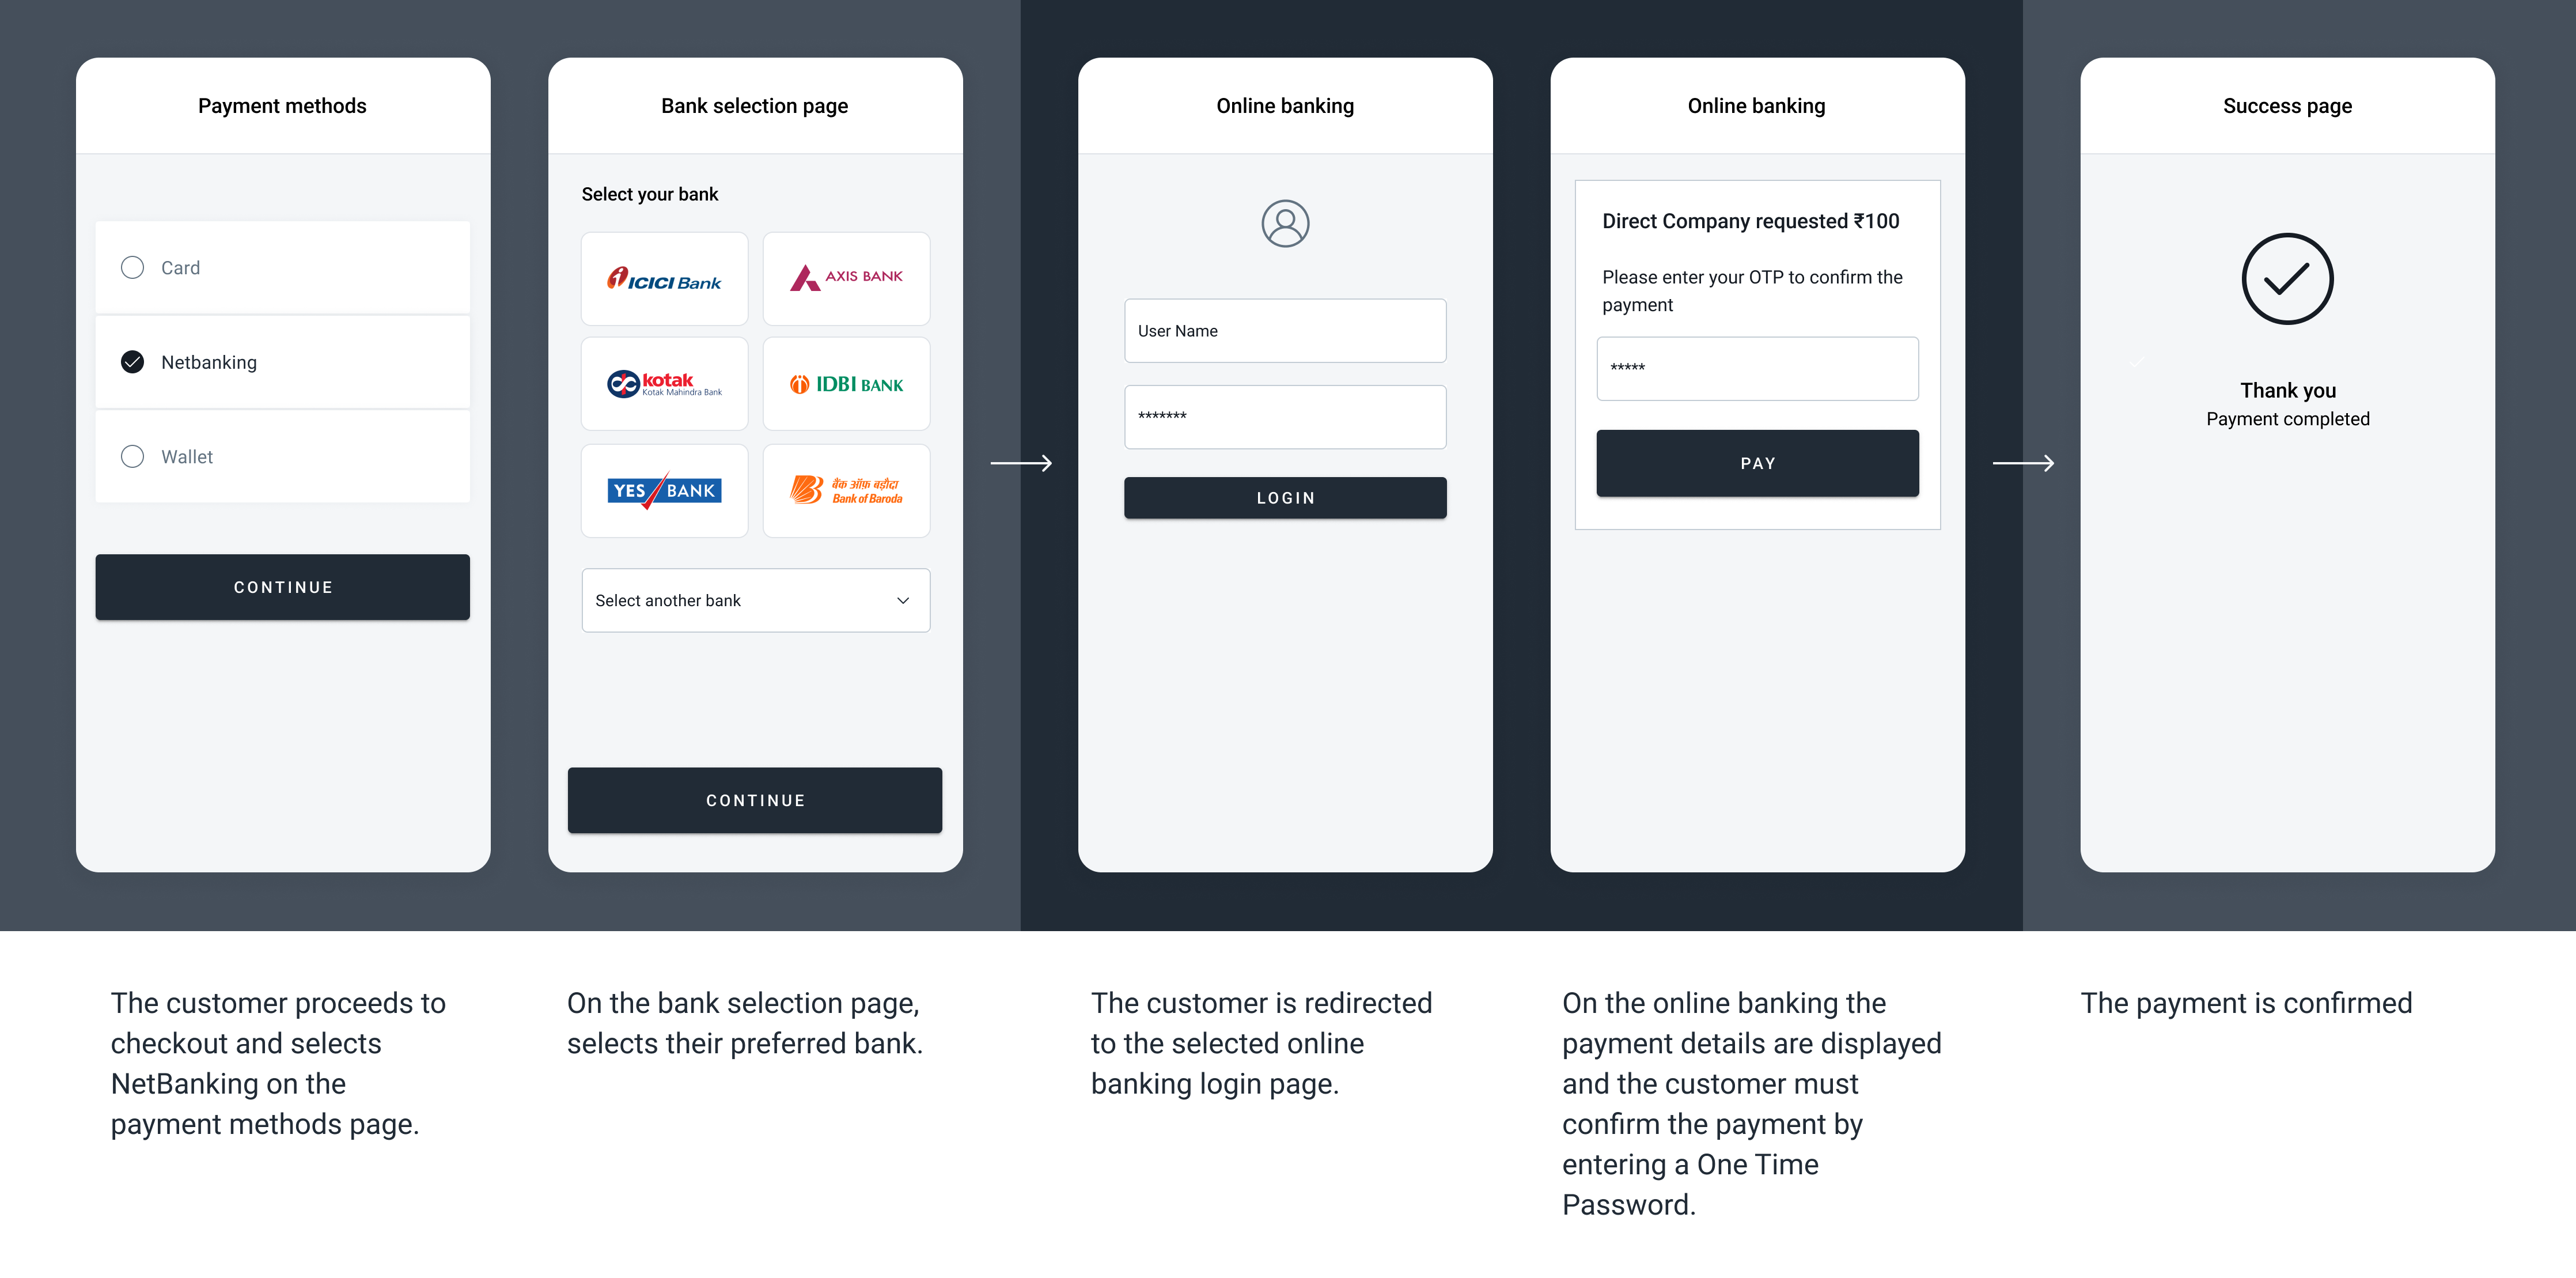 The screenshots illustrate a generic Netbanking redirect flow.  
The specifics of the flow can change depending on the bank selected to complete the transaction.